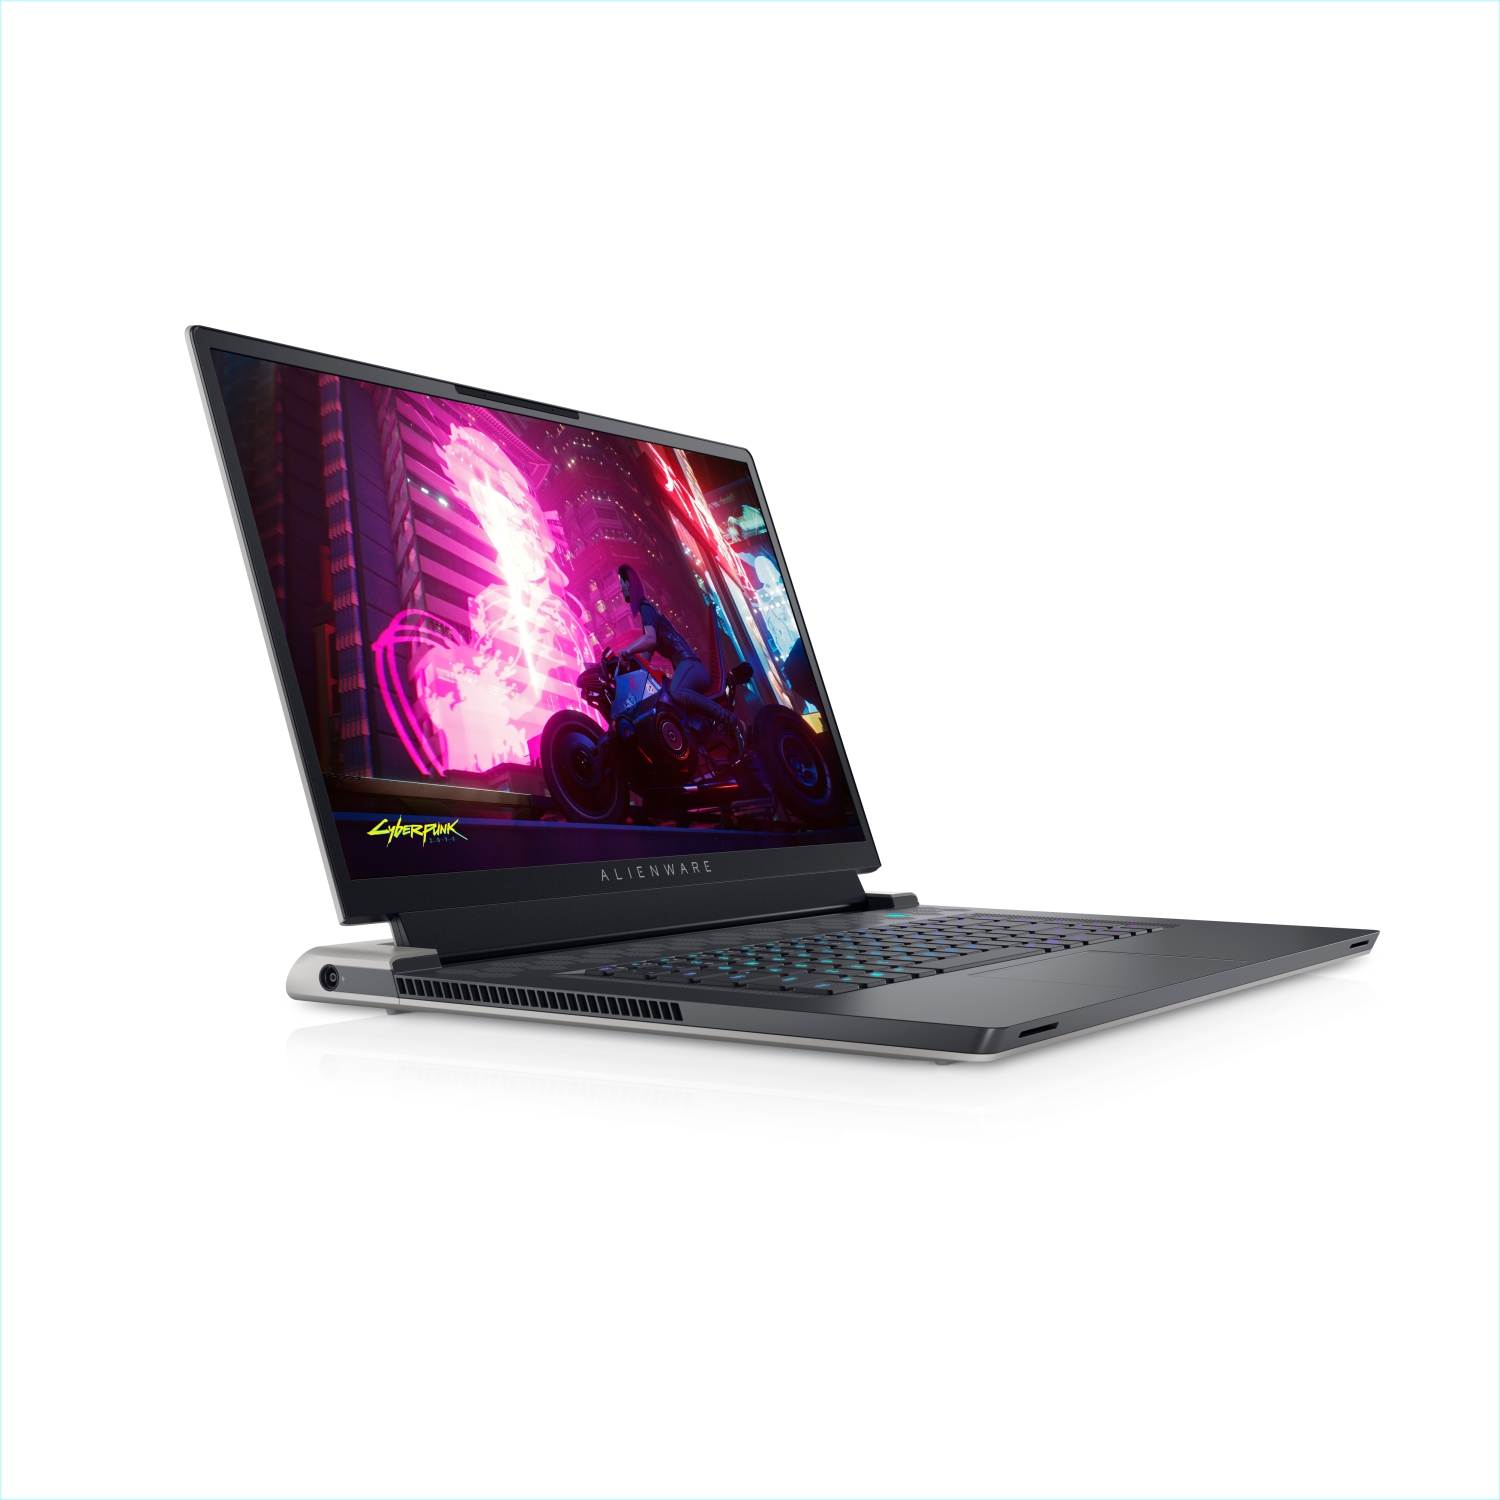 Refurbished (Excellent) - Dell Alienware X17 R1 Gaming Laptop (2021), 17.3" FHD, Core i7, 512GB SSD, 16GB RAM, RTX 3060, 8 Cores @ 4.6 GHz, 11th Gen CPU Certified